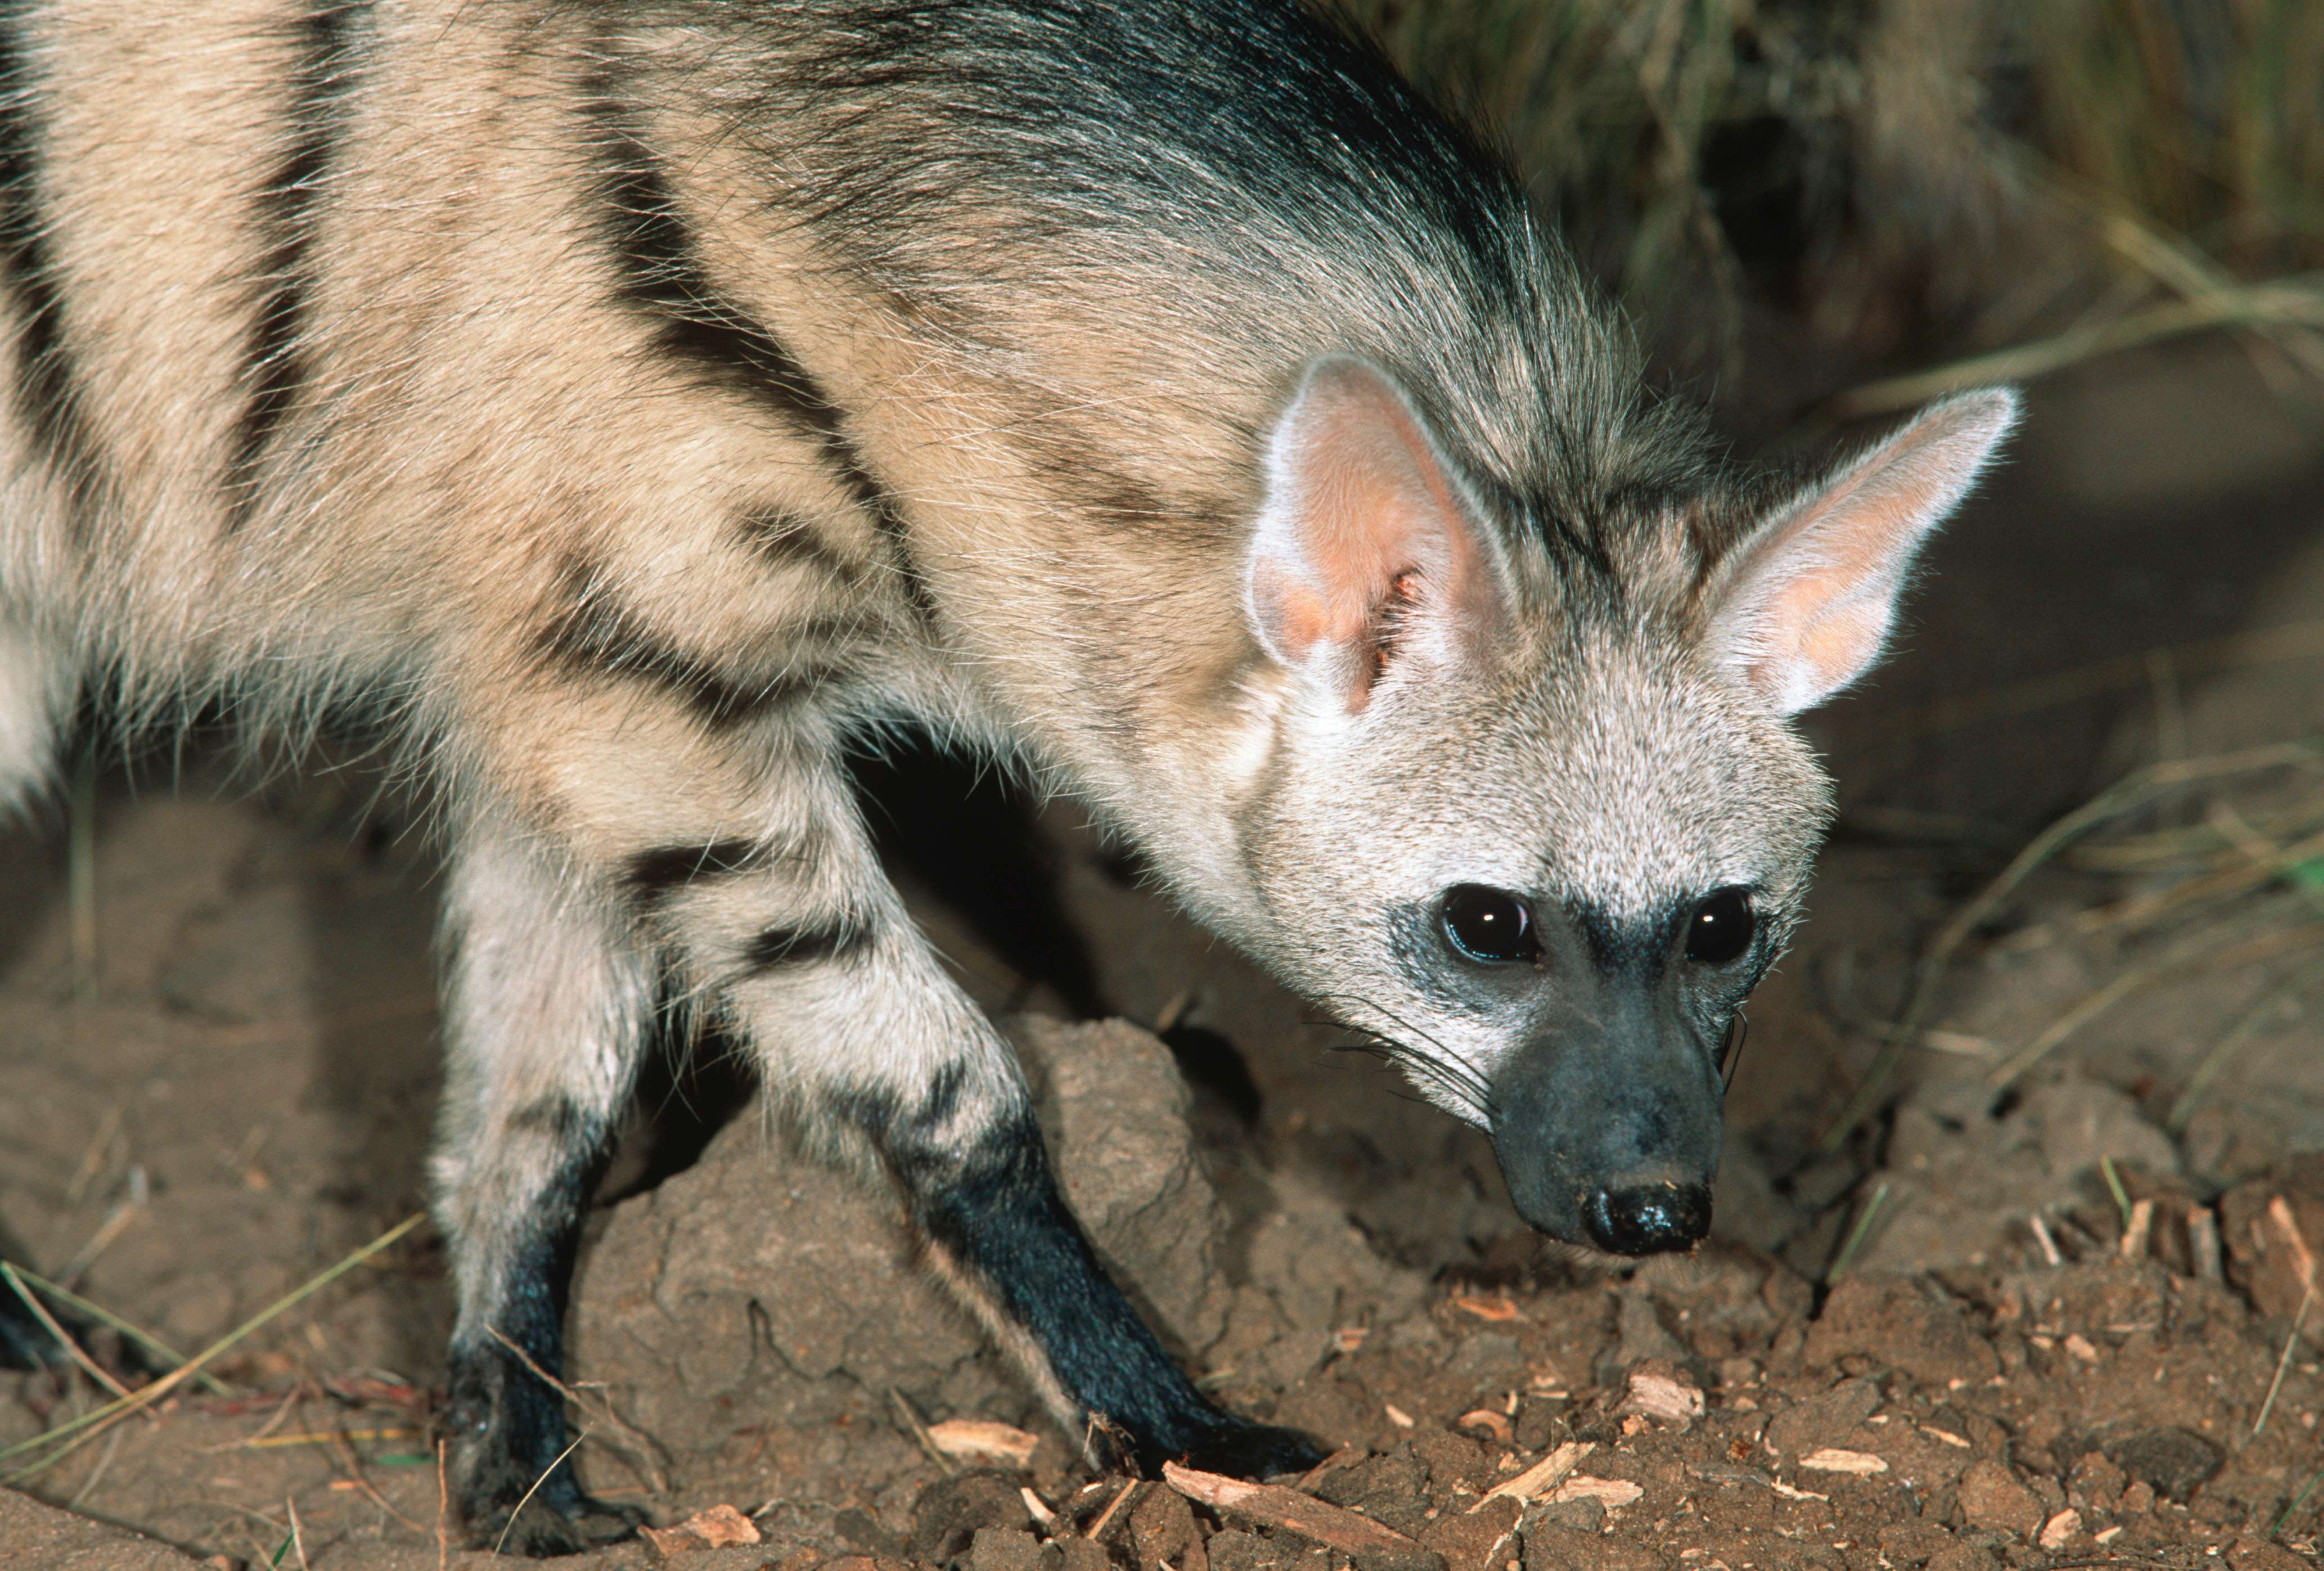 The nocturnal aardwolf preys on termites and can be found in southern and eastern Africa. © Martin Harvey/WWF-Canon